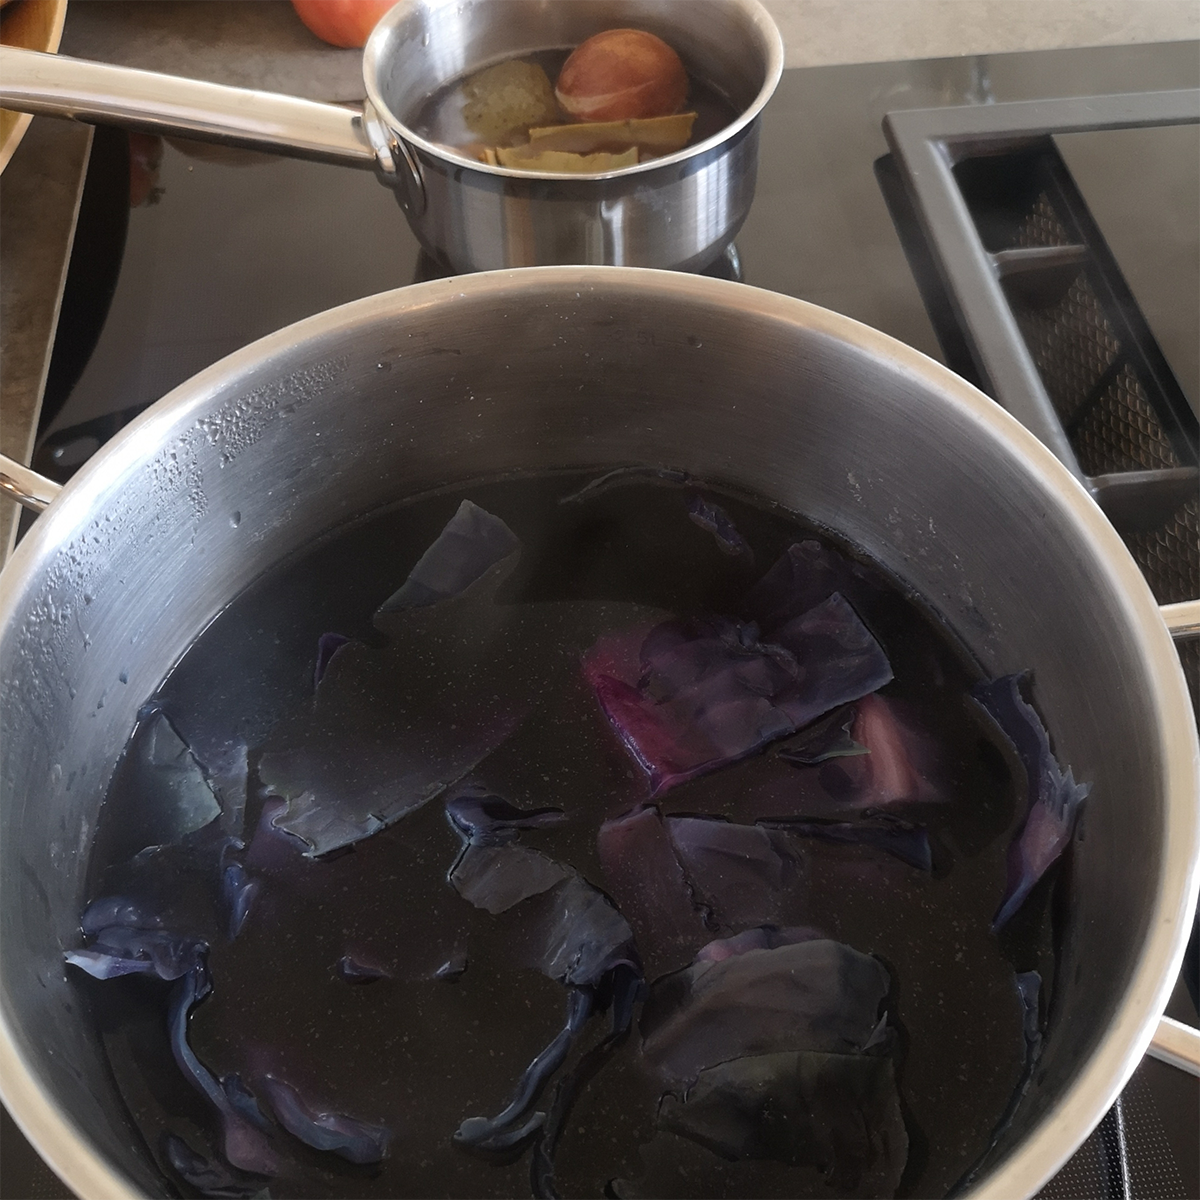 This red cabbage has the blues